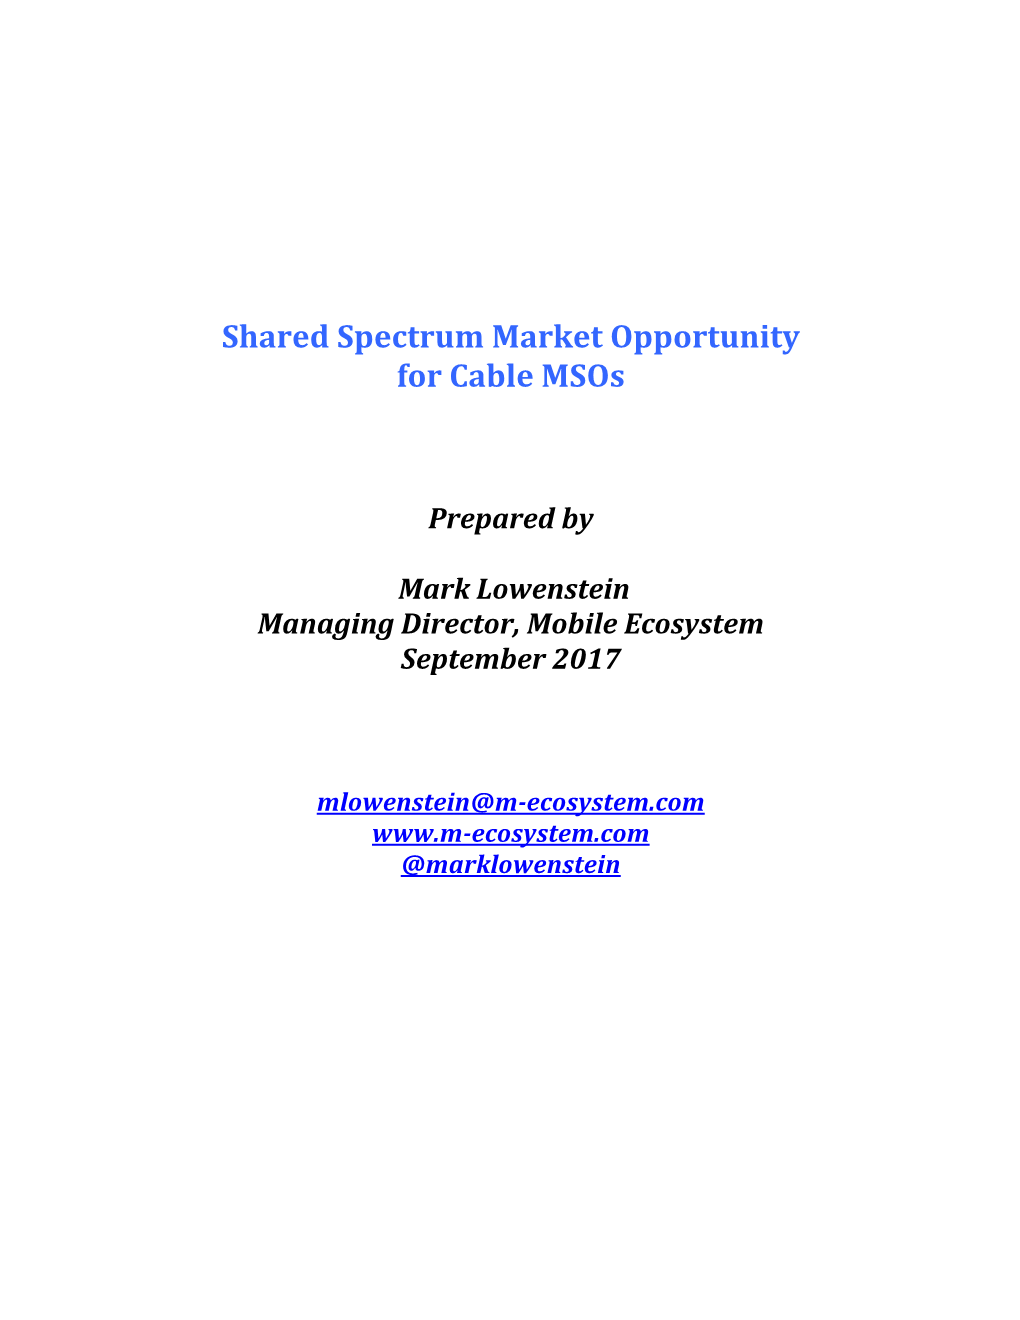 Shared Spectrum Market Opportunity for Cable Msos